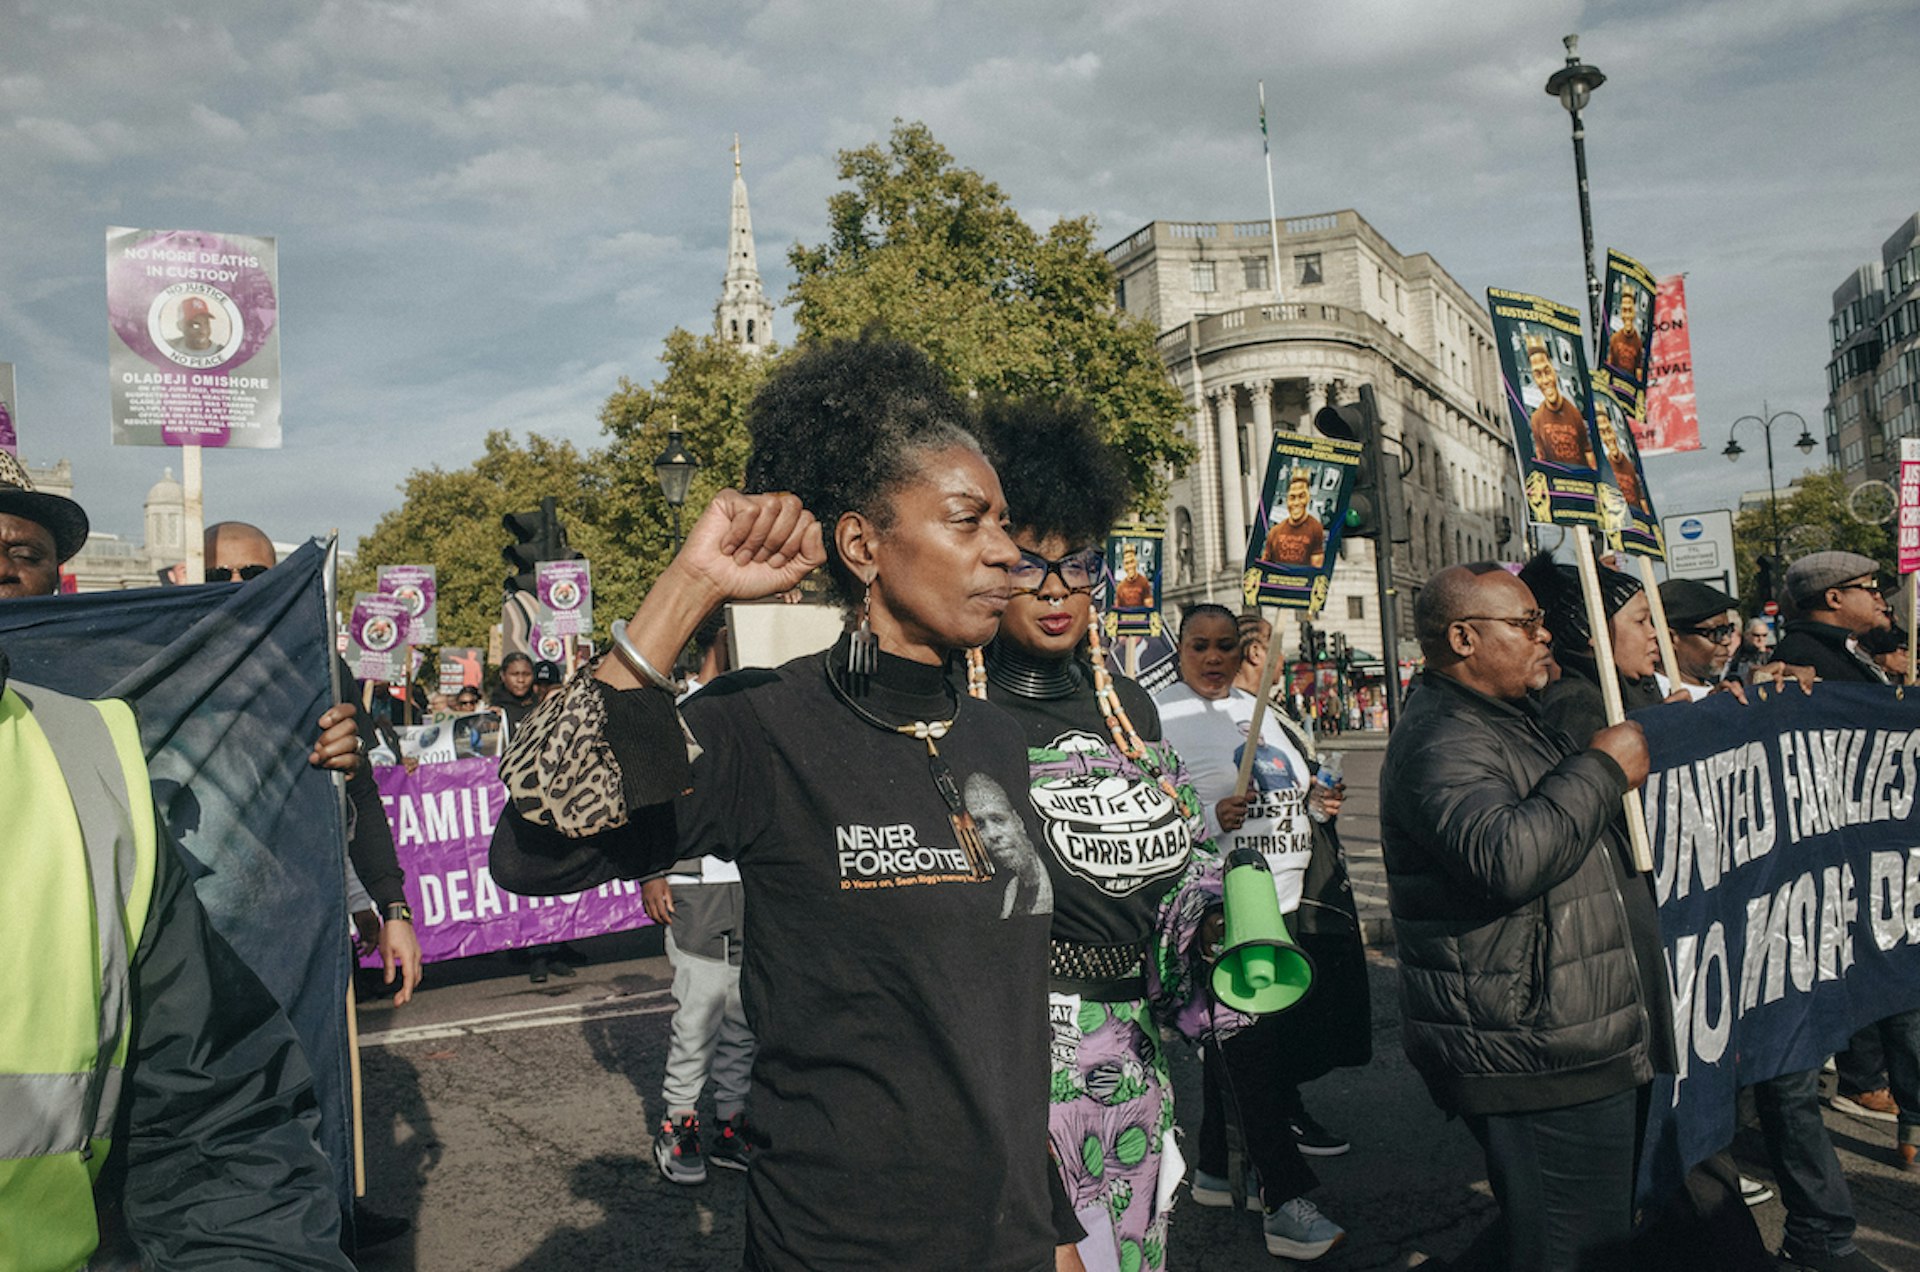 Thousands protest in London over deaths in police custody